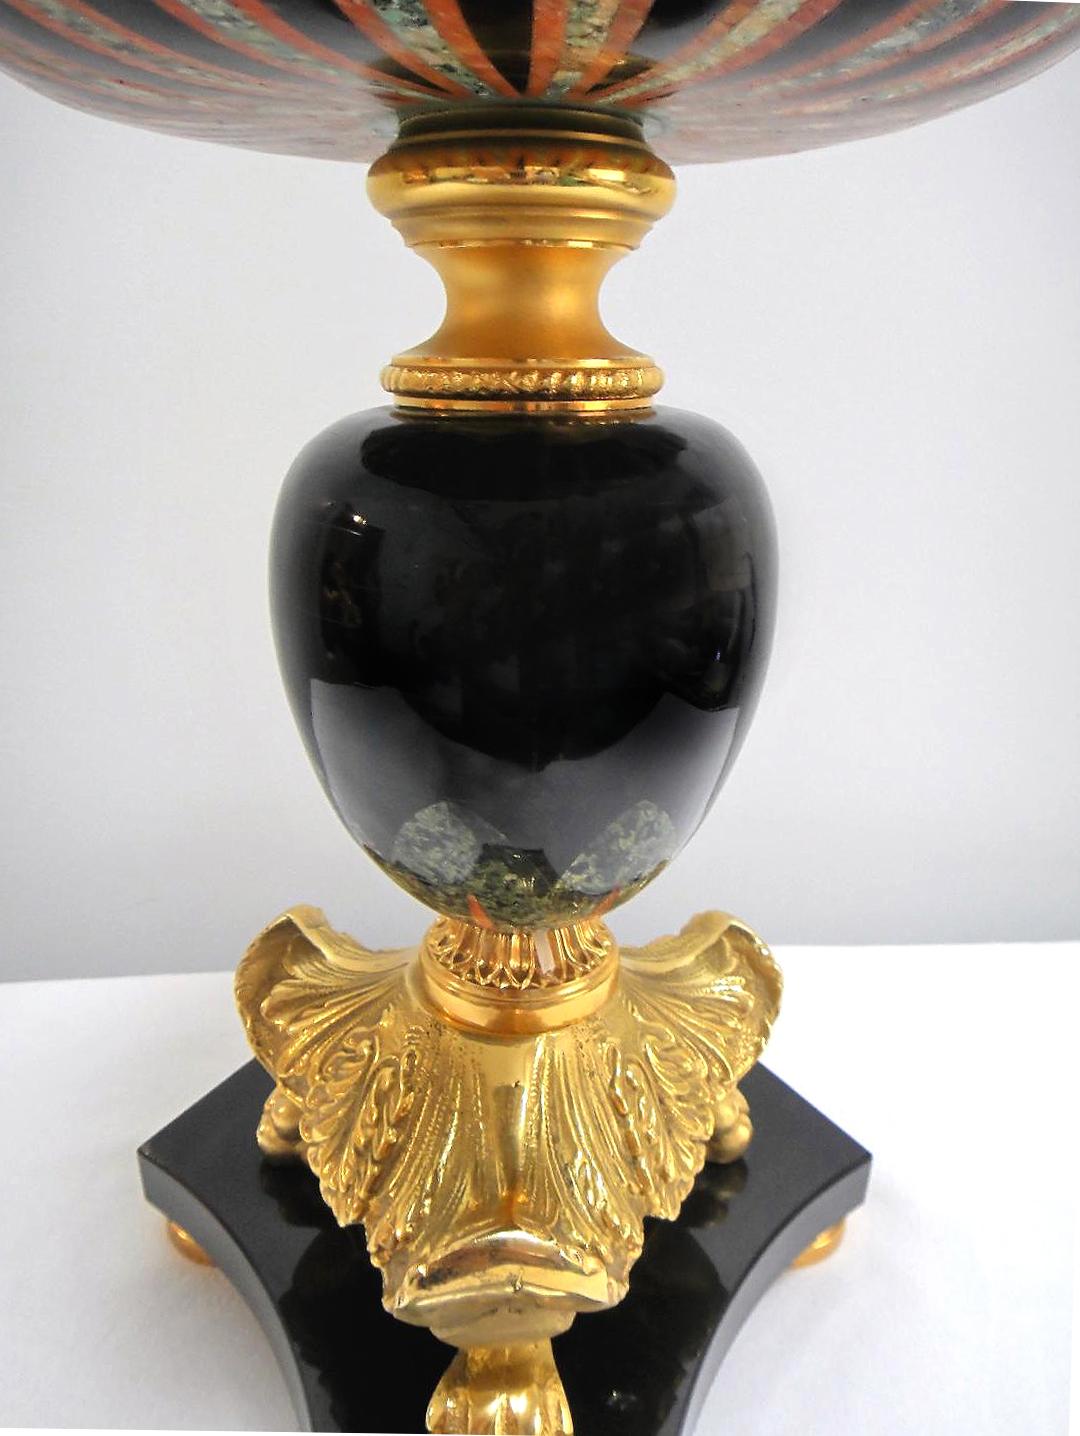 Laudarte Srl Oversale Marble, Bronze and Horn Urn, Italy In Excellent Condition For Sale In Miami, FL